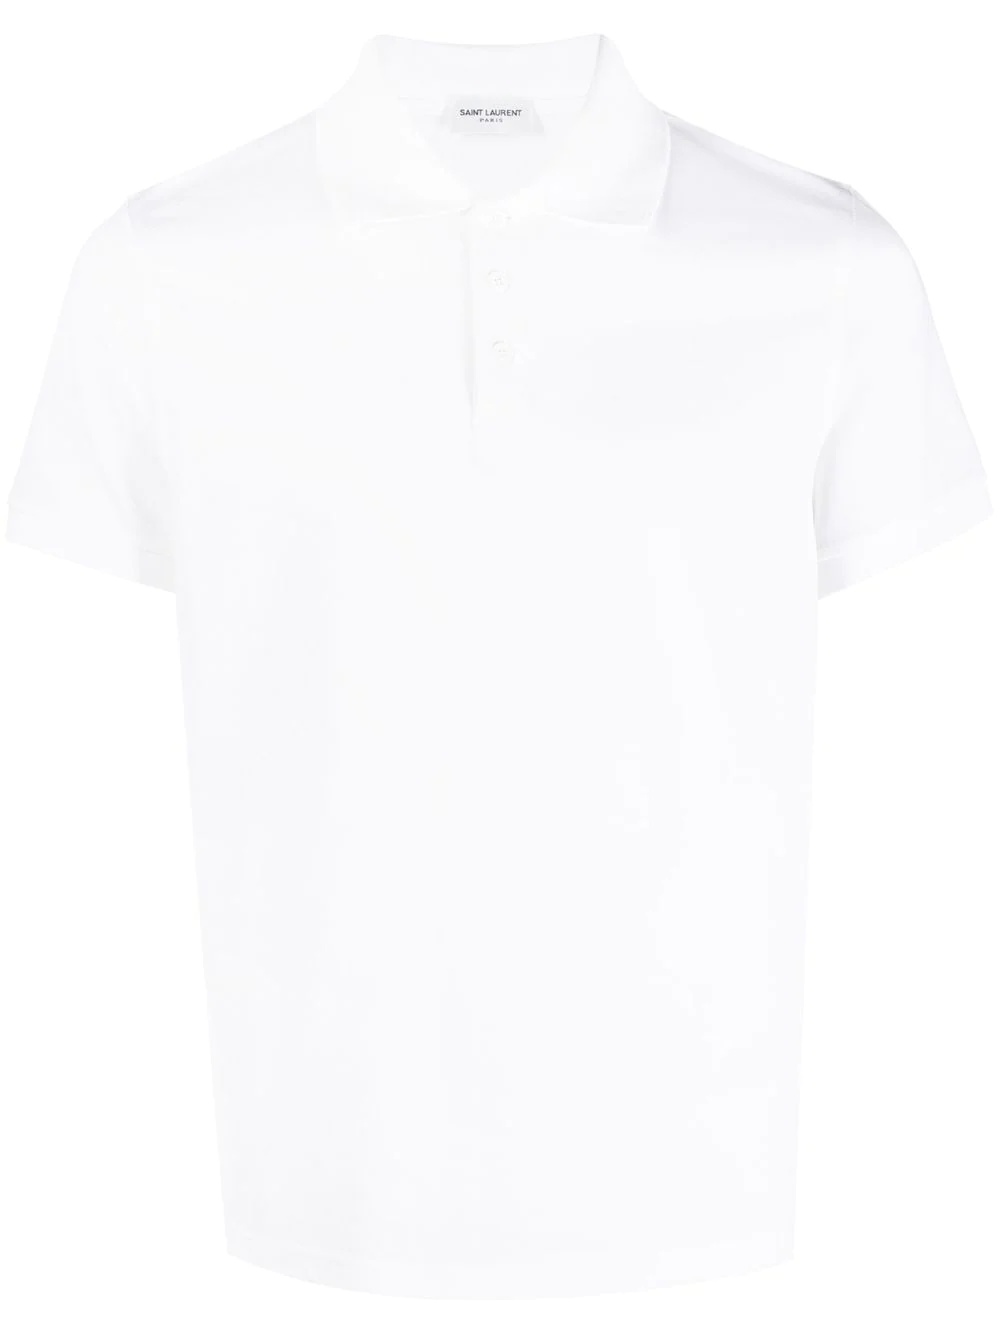 embroidered-logo short-sleeved polo shirt - 1